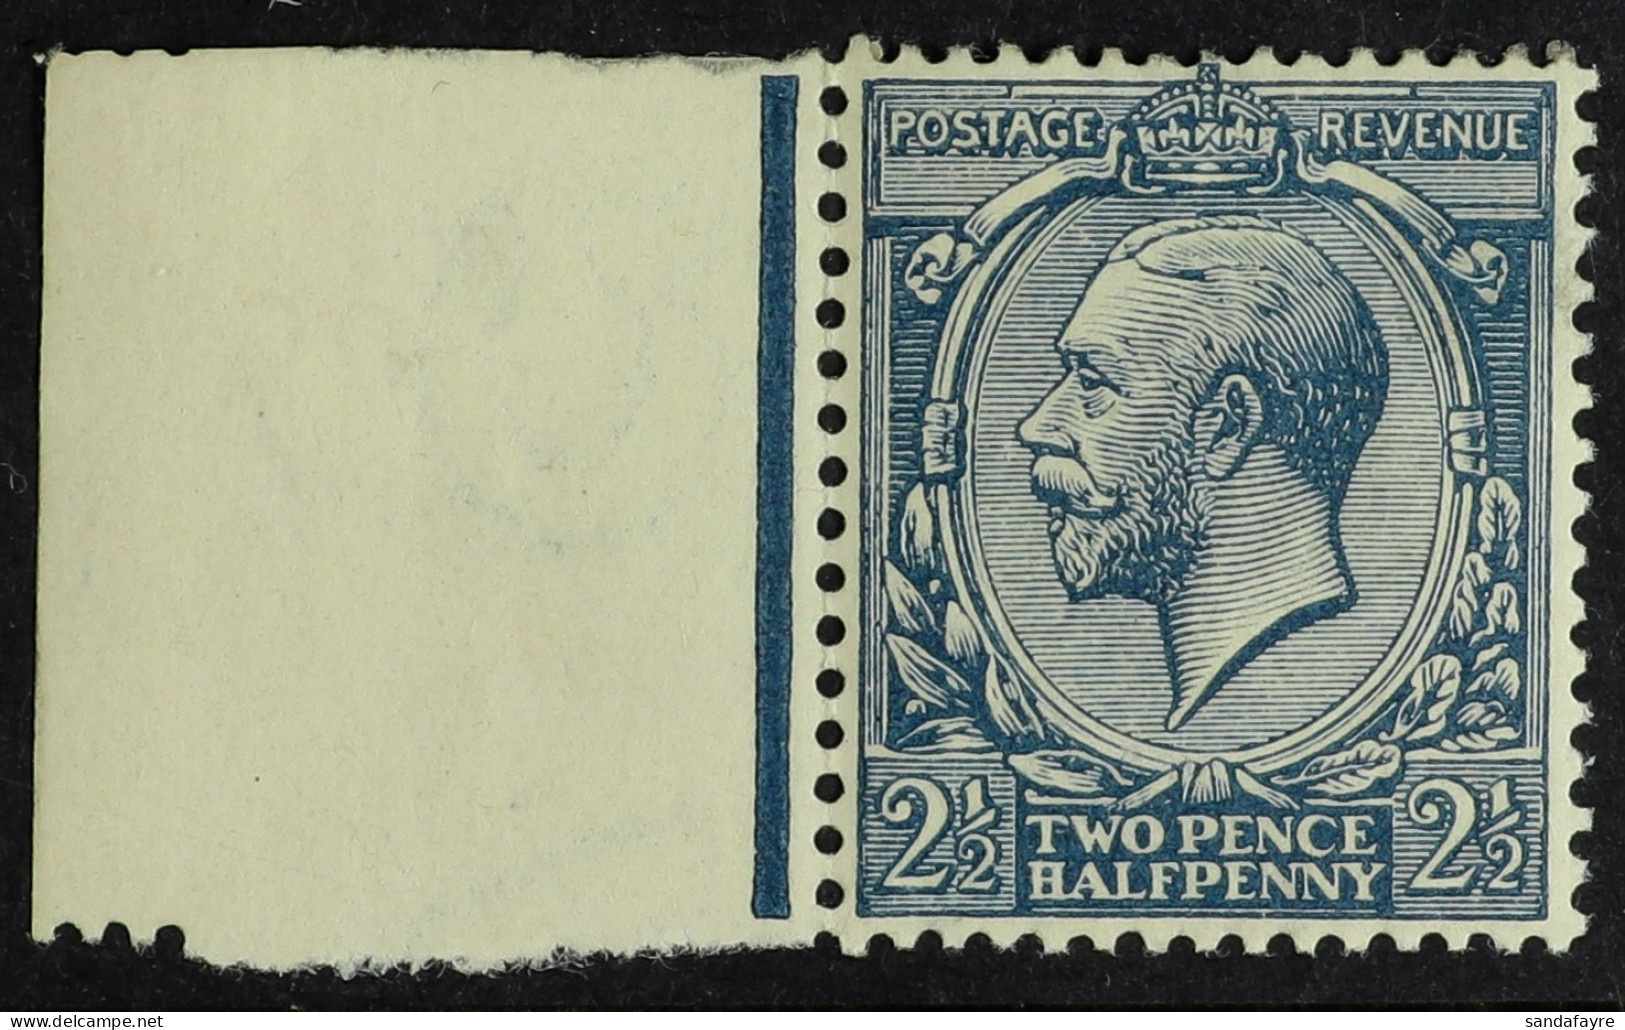 1912-24 2Â½d Dull Prussian Blue Wmk Cypher, Spec N21(17), Never Hinged Mint With Sheet Margin At Left, Slight Bend, Copy - Unclassified